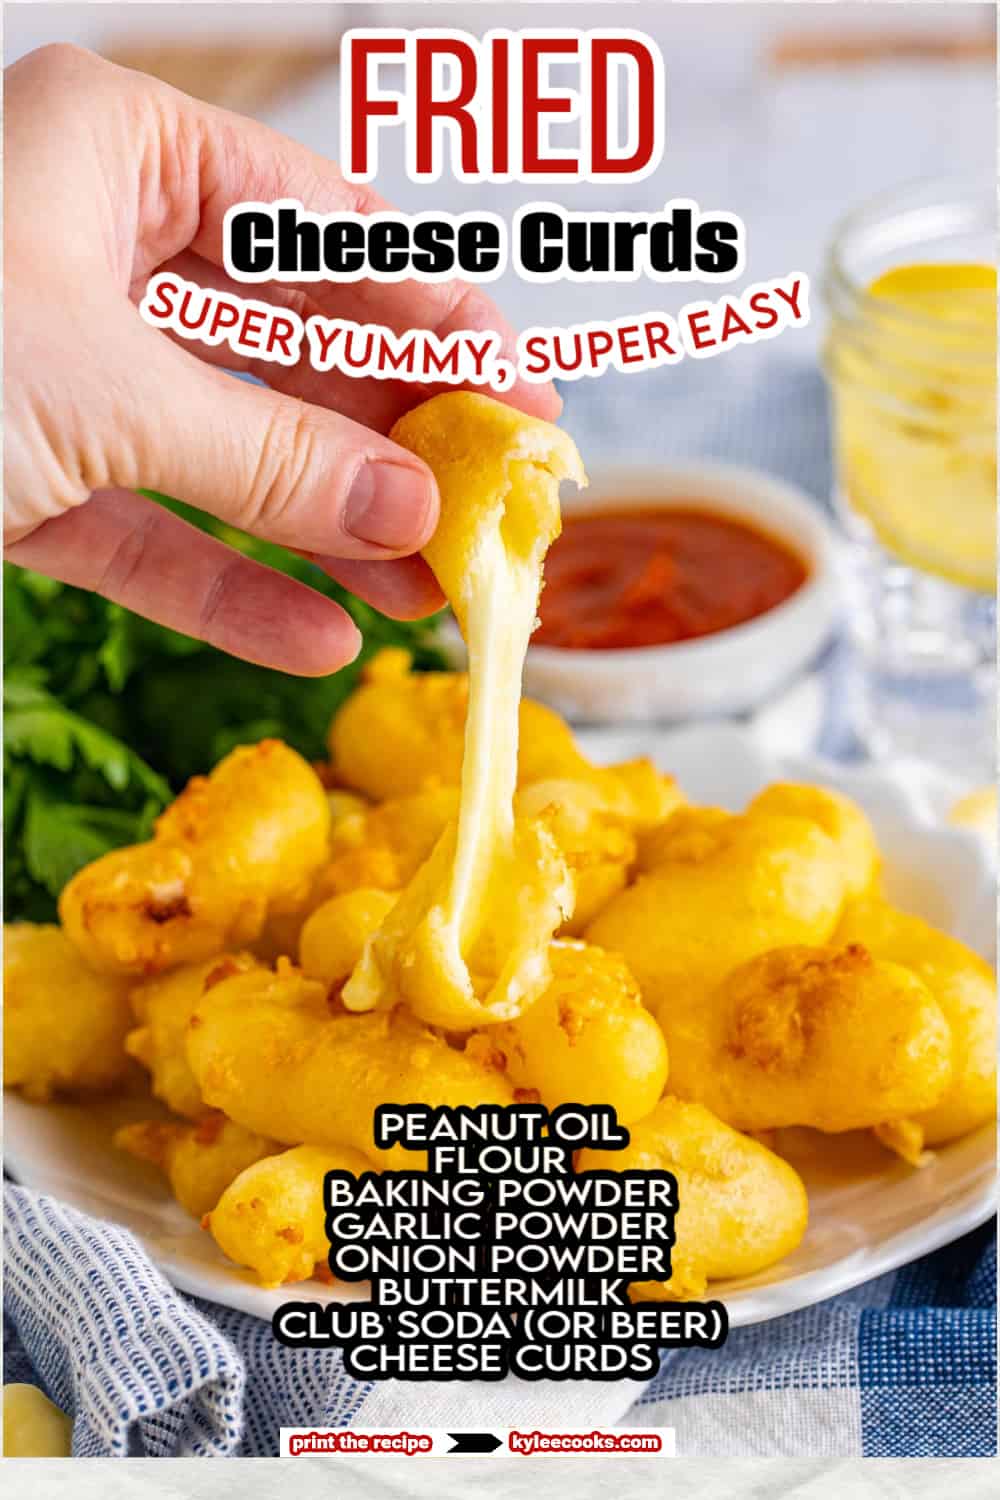 fried cheese curds with recipe name and ingredients overlaid in text.